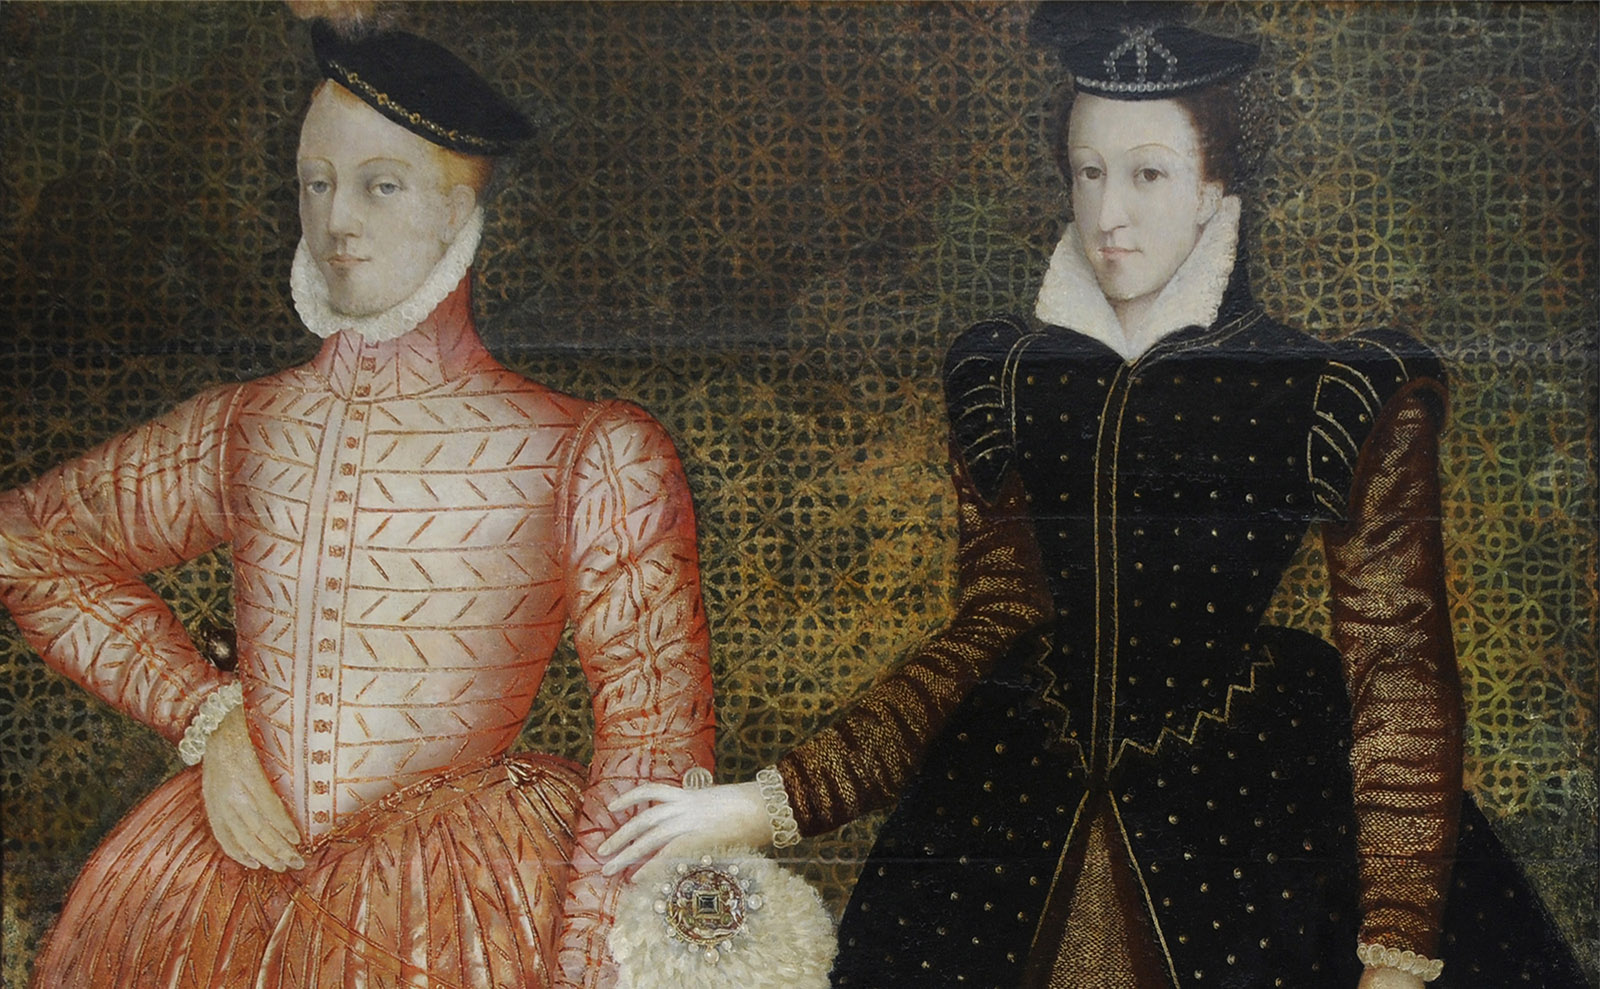 painting of mary queen of scots with her husband